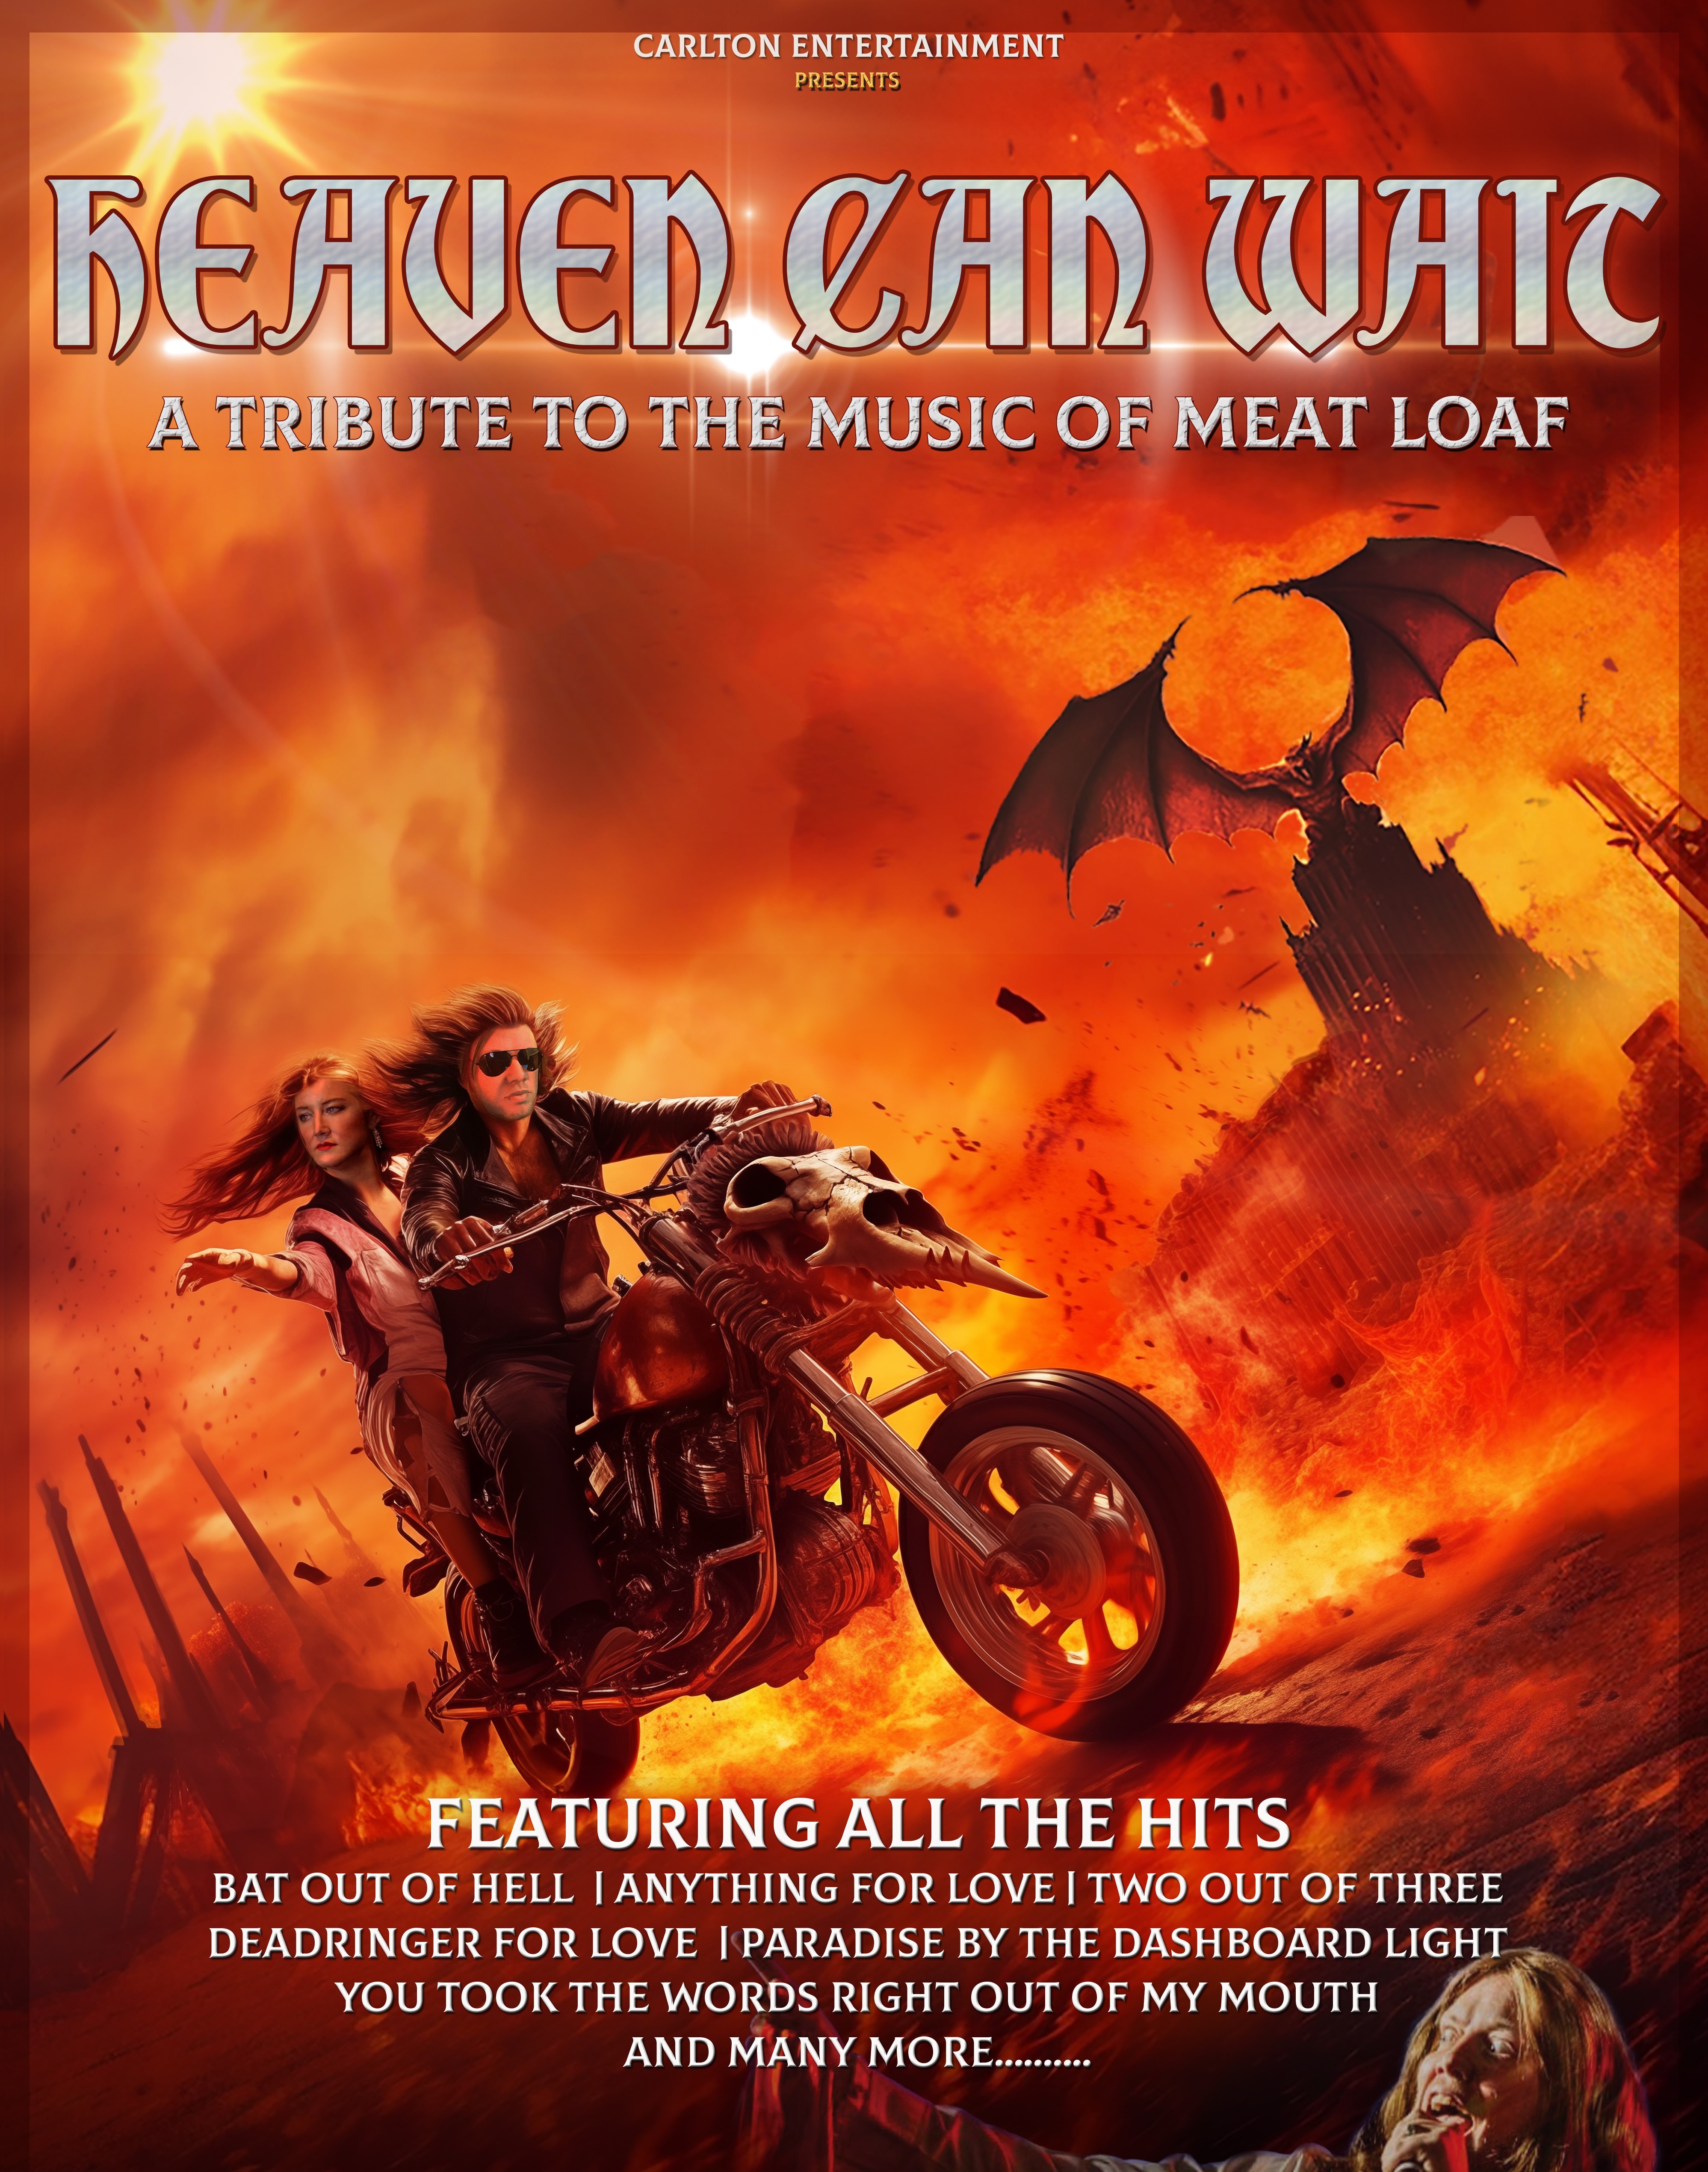 HEAVEN CAN WAIT - MEATLOAF TRIBUTE SHOW